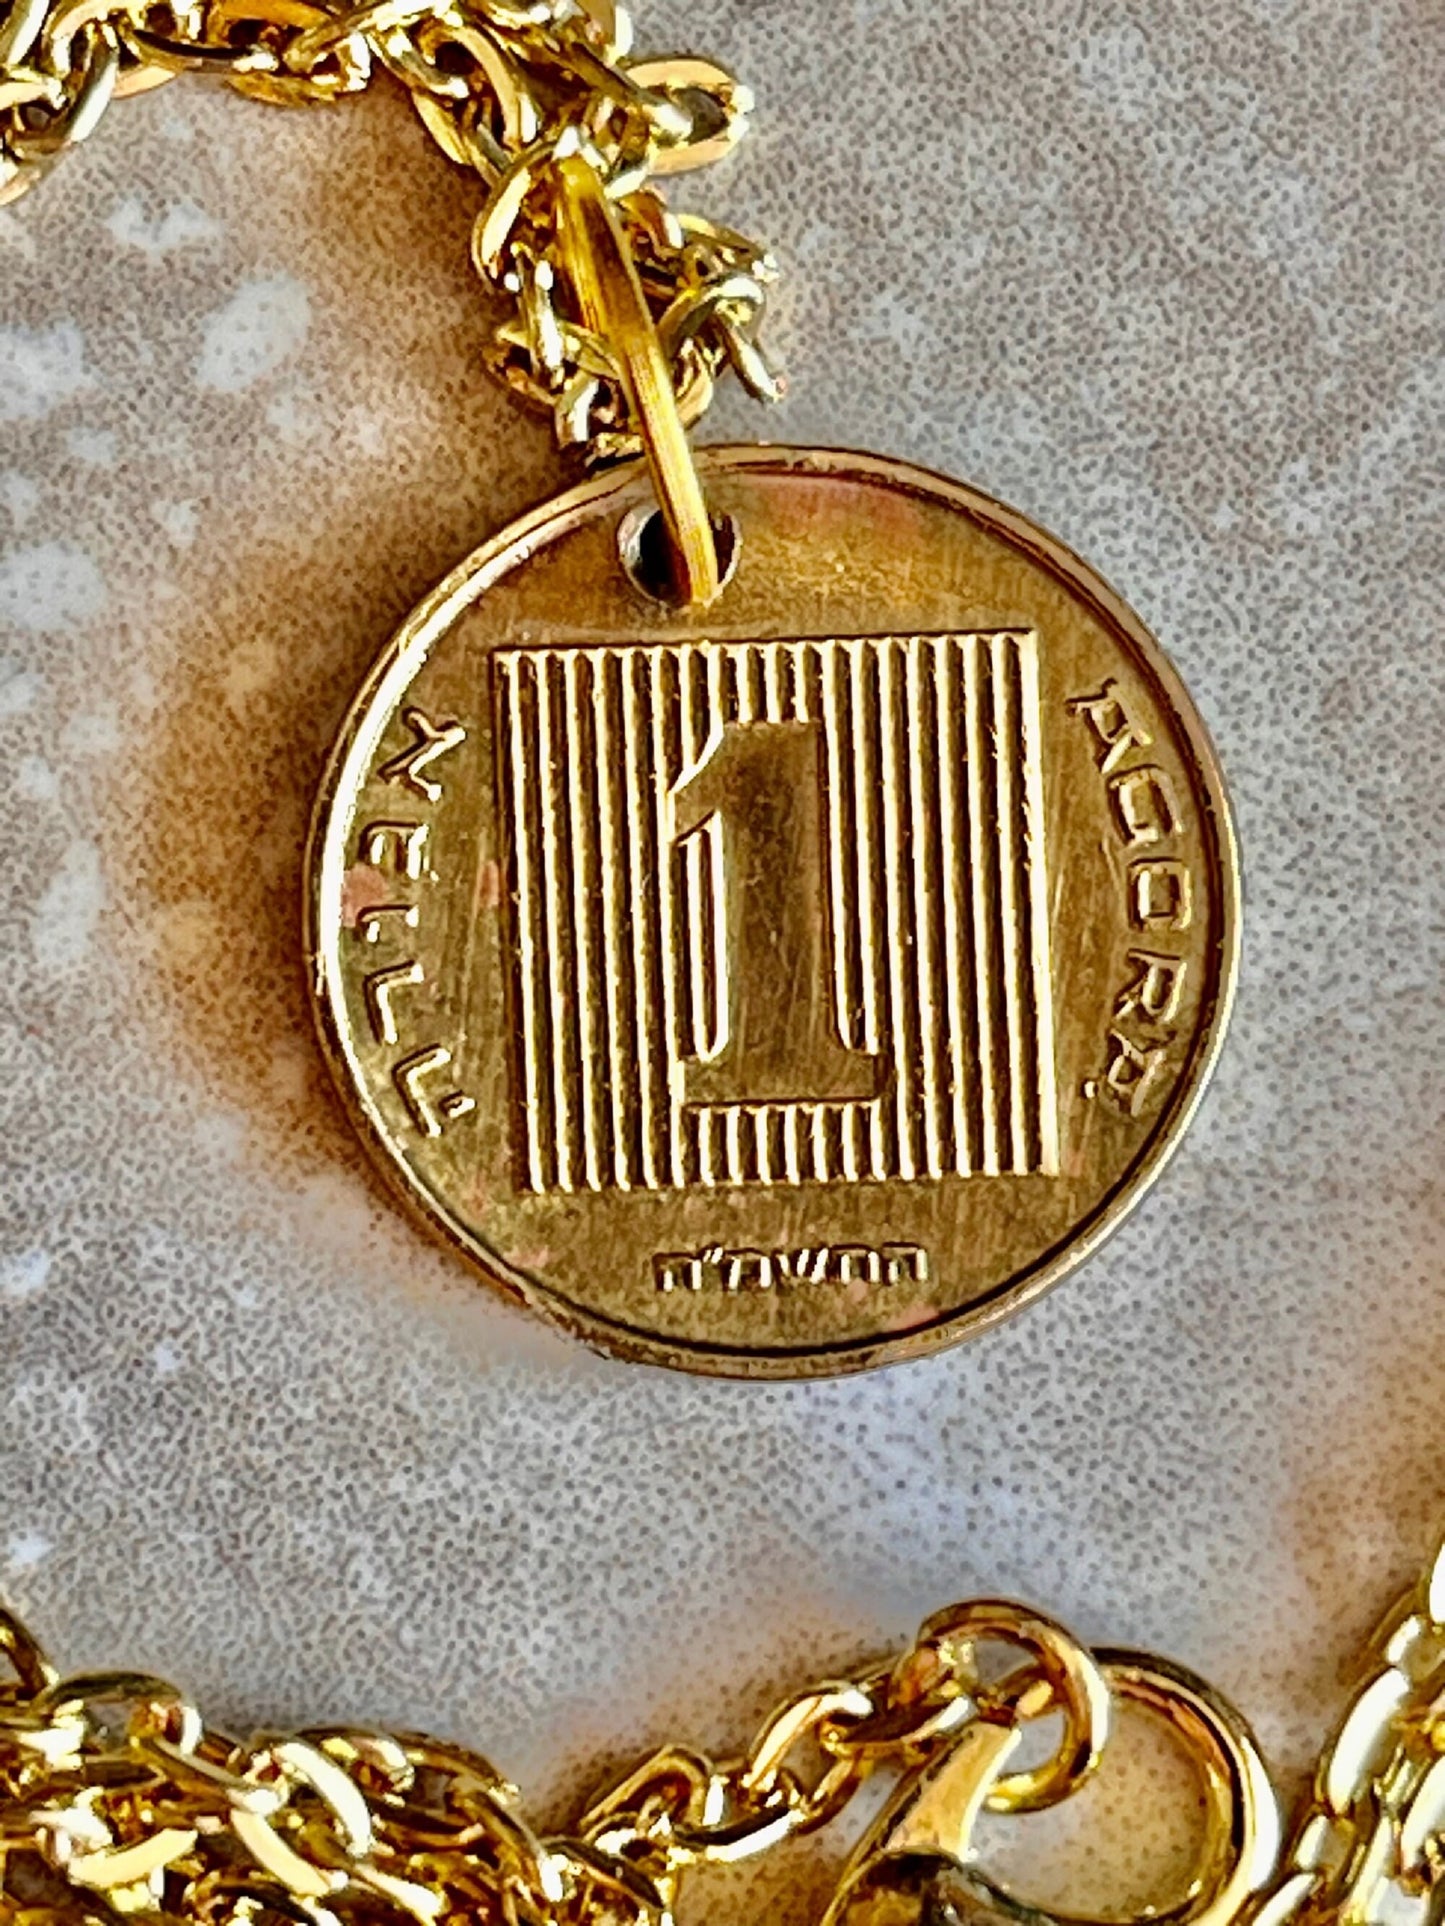 Israel Coin Necklace 1 Acora Pendant Jewish Israelite Hanukkah Personal Handmade Jewelry Gift Friend Charm For Him Her World Coin Collector